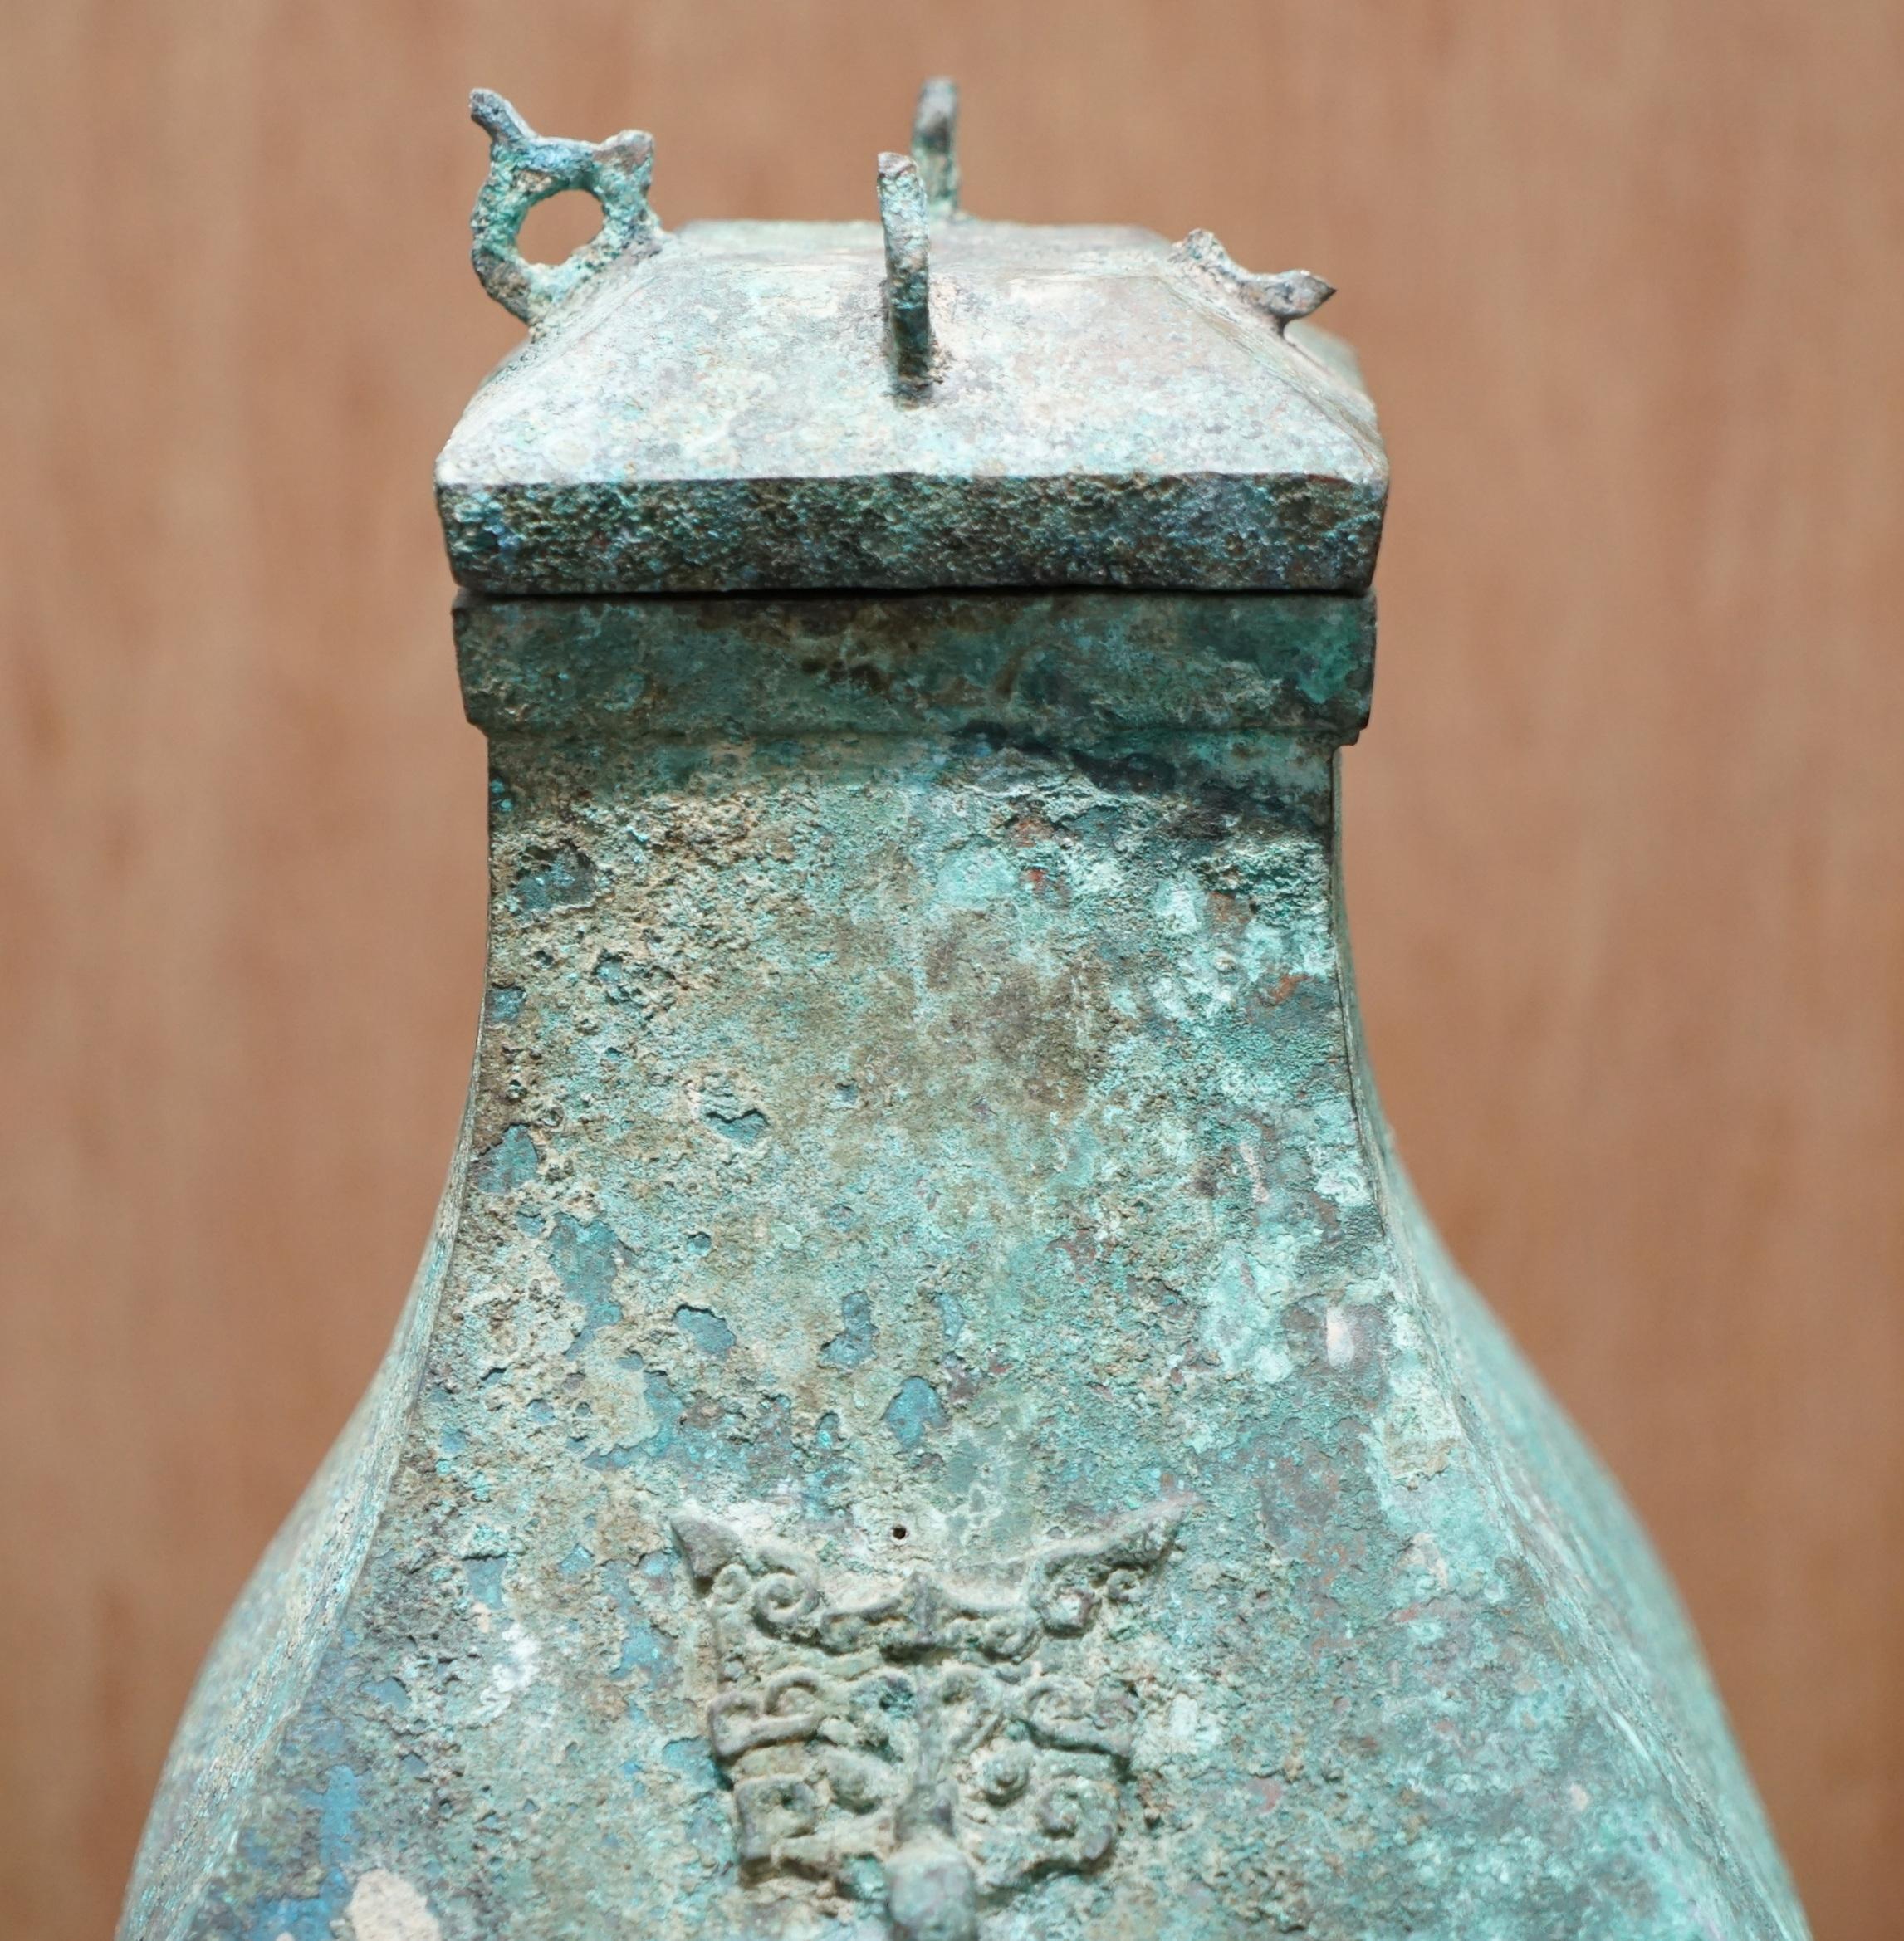 Fanghu Han Dynasty 206BC-220AD Chinese Bronze Ritual Wine Vessel Jug & Cover For Sale 1